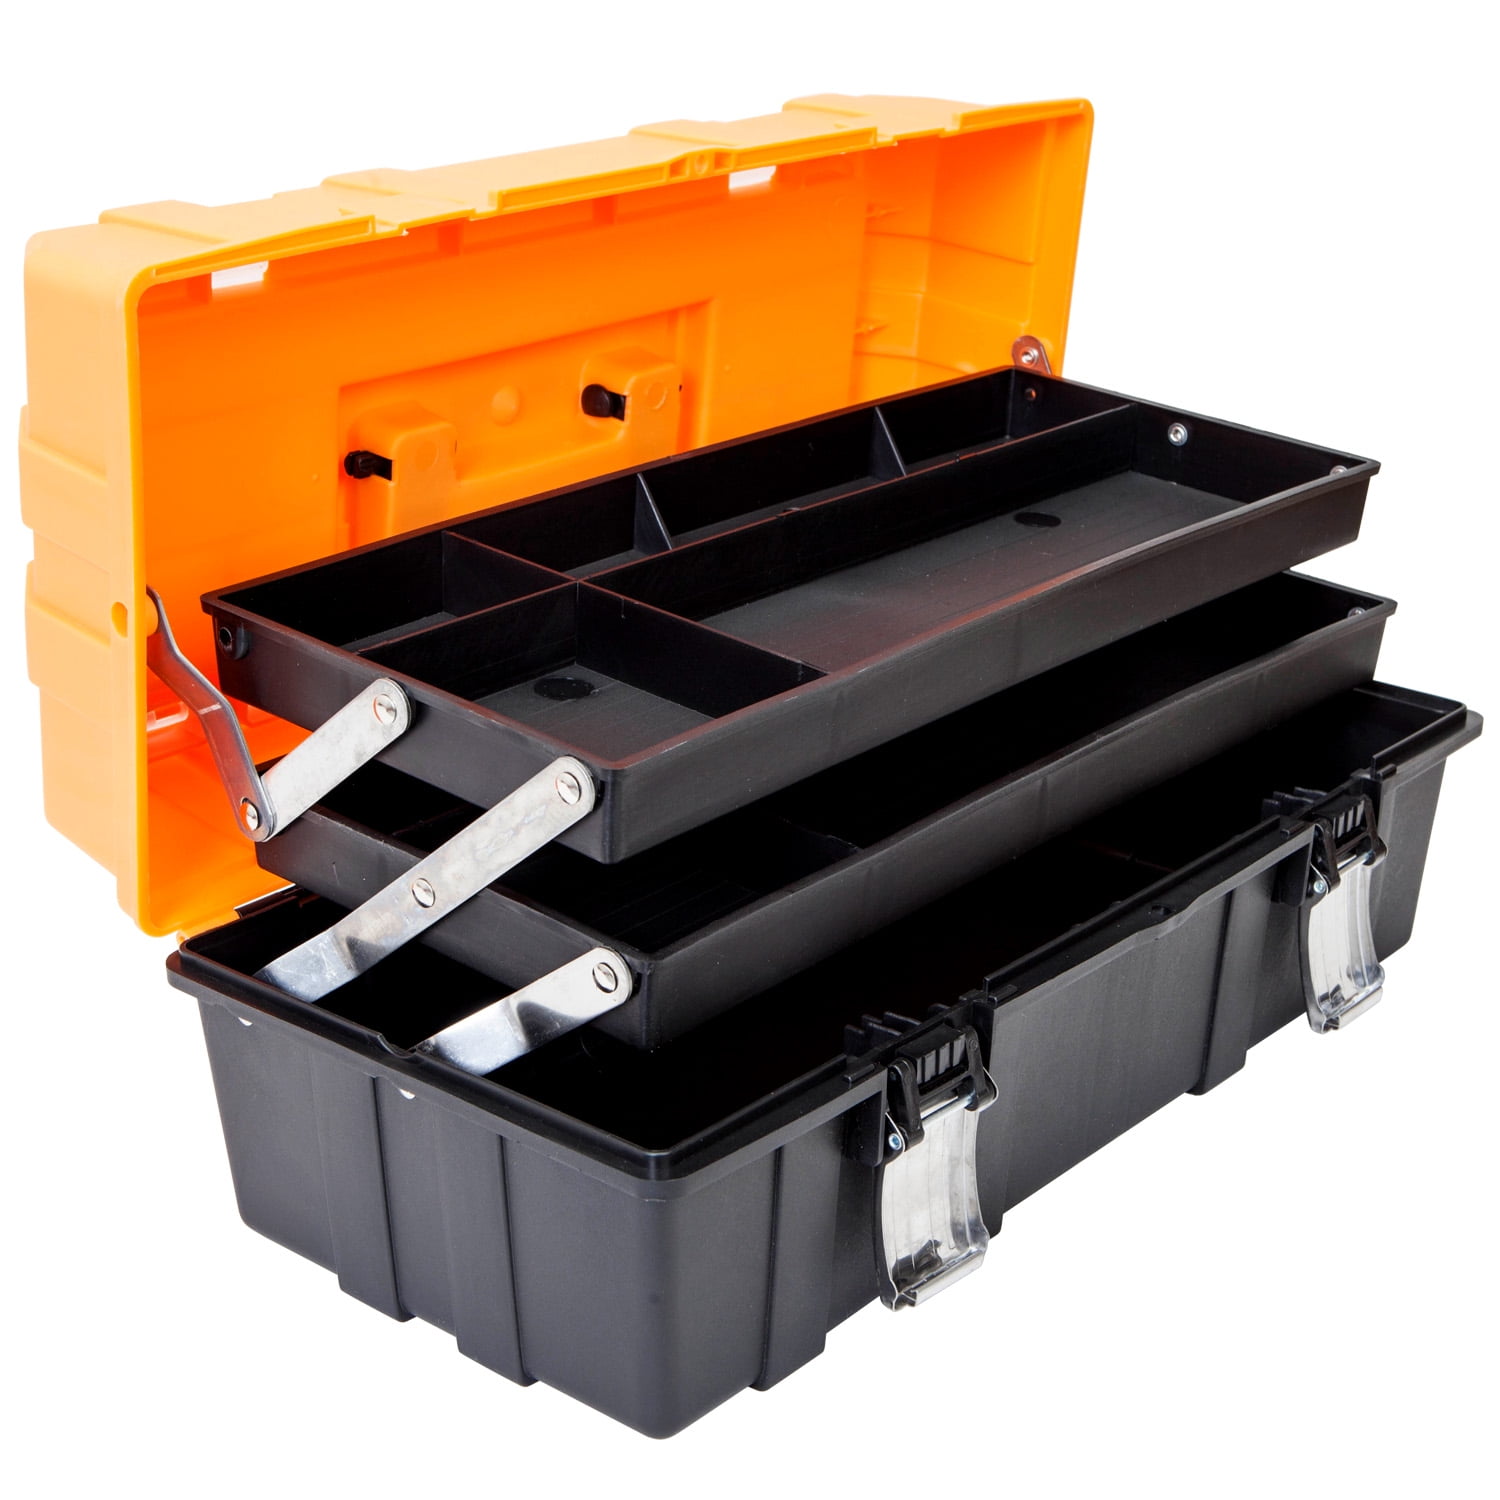 Household Plastic Tool Organizers,Orange Folding Storage Box 17-Inch Multi-Purpose 3-Layer Toolbox with Tray and Dividers 